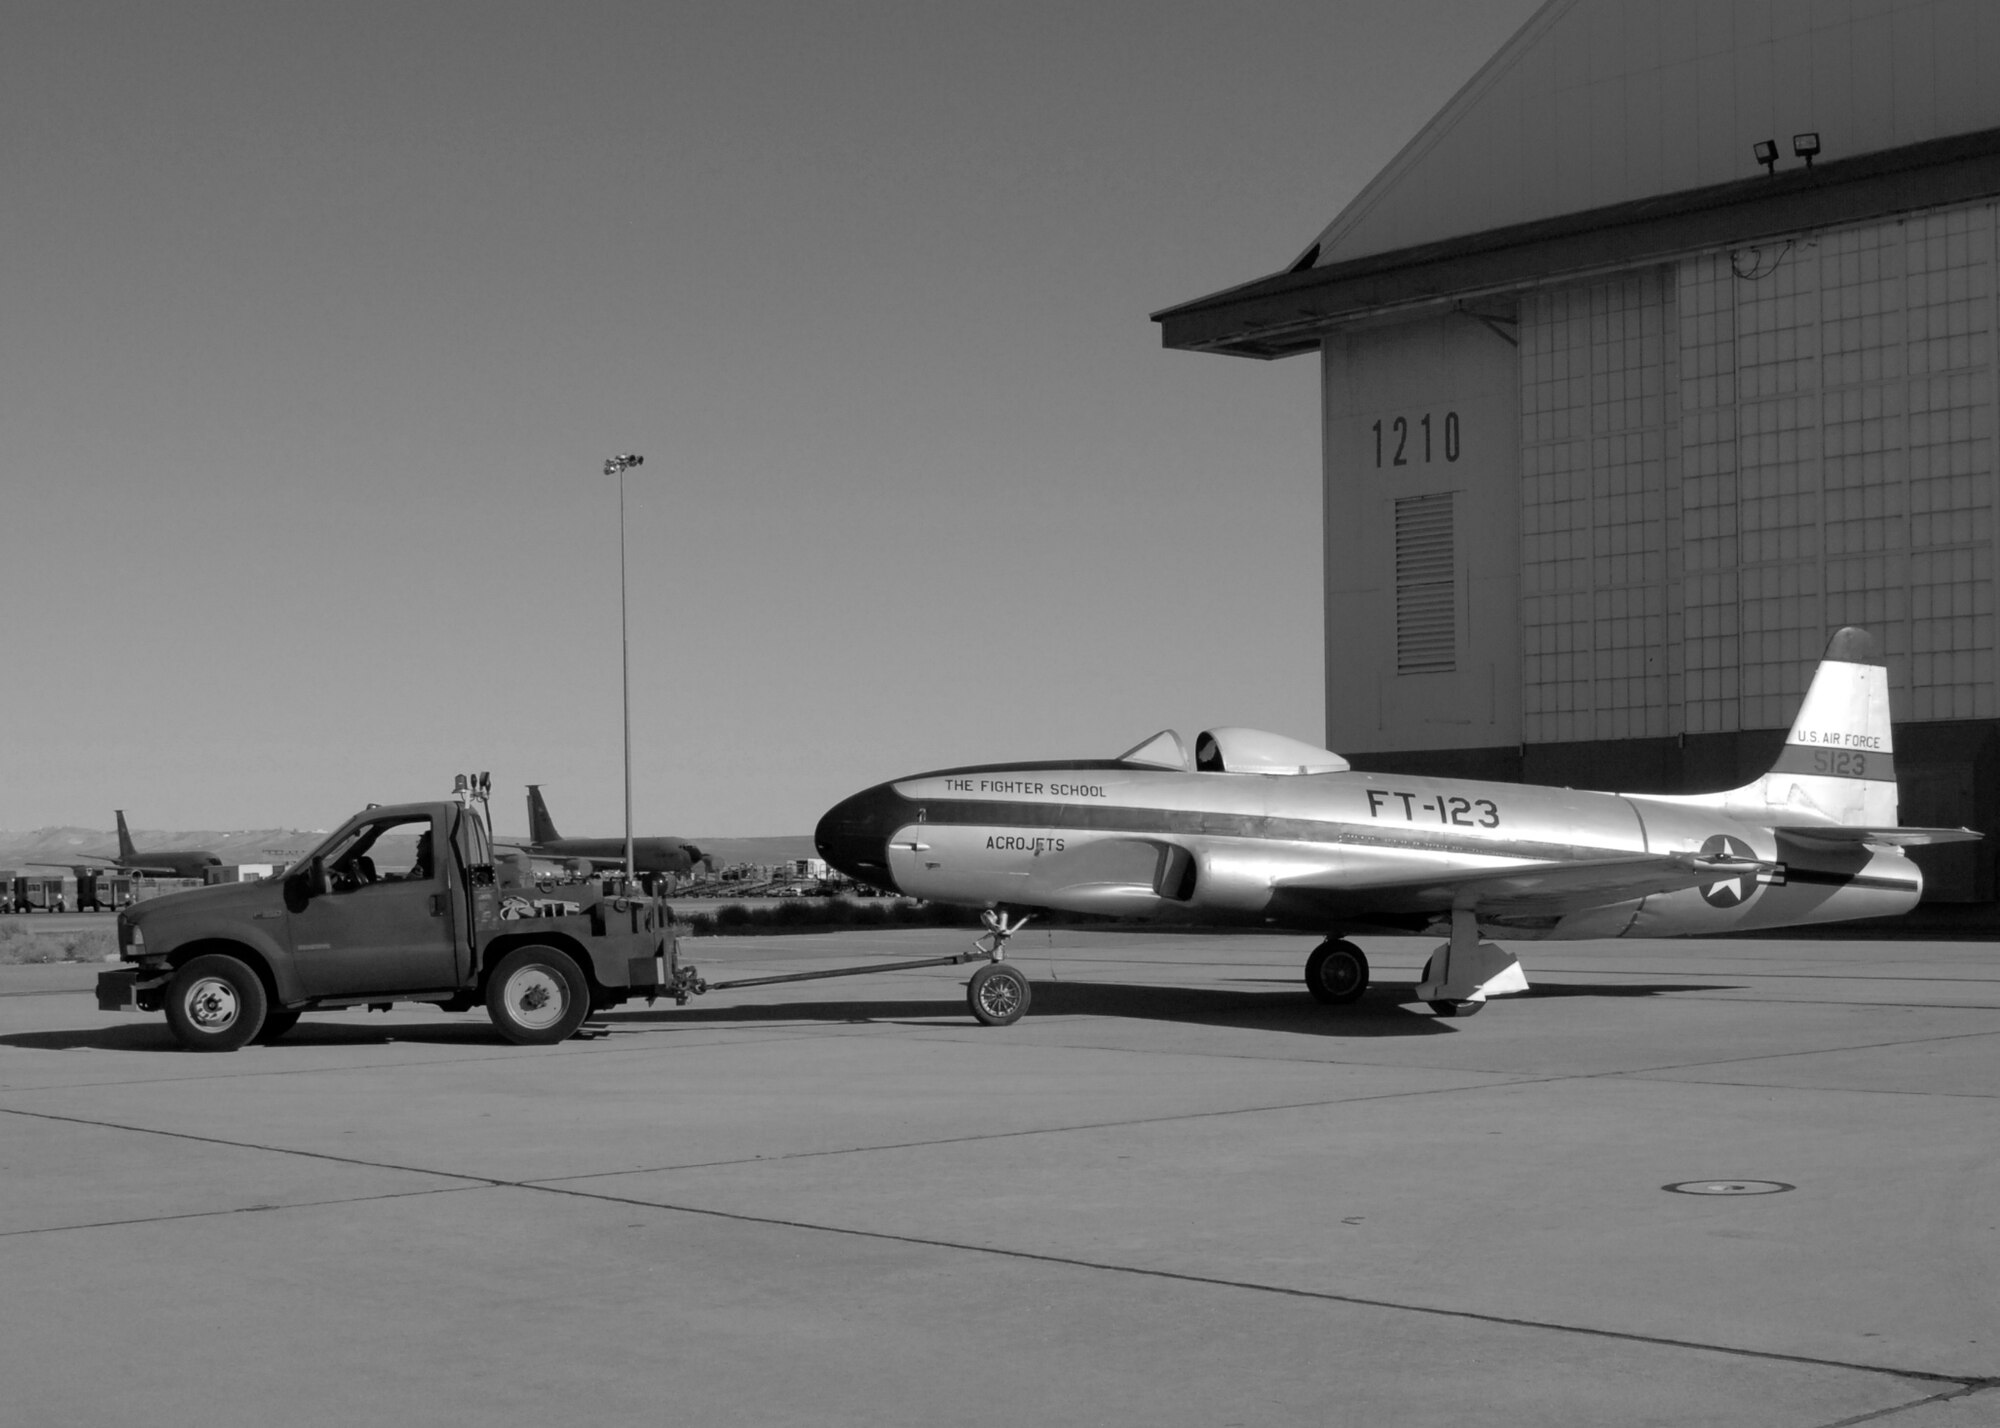 The P-80 Shooting Star departs Hangar 1210 for its new home in Hangar 1864. (U.S. Air Force Photo by Laura Mowry)